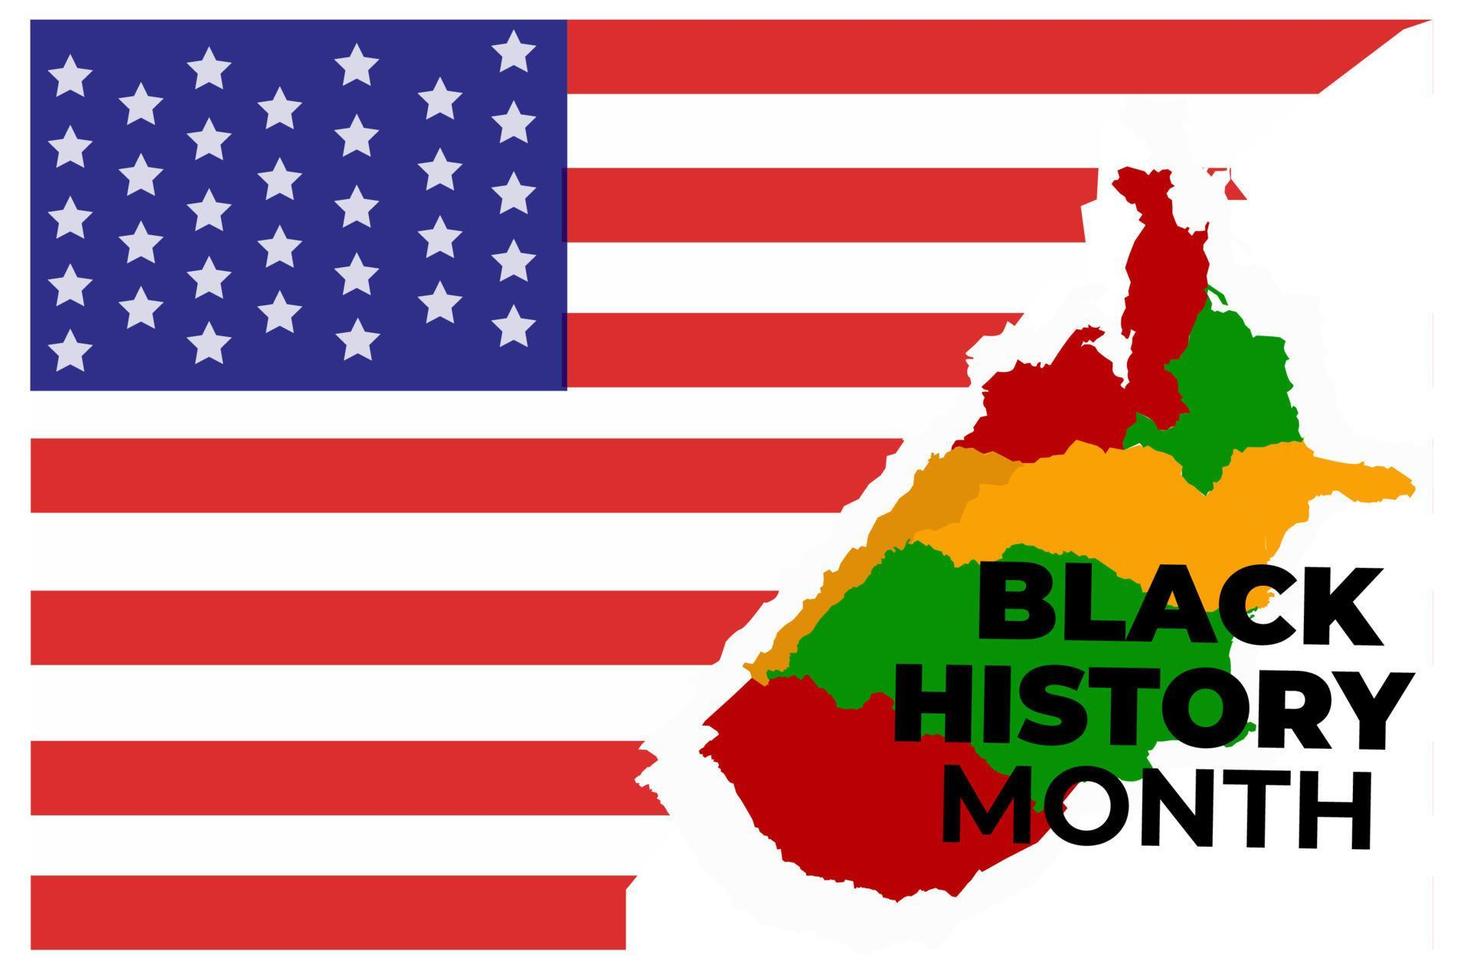 The United States' historic anniversary is commemorating Black History Month. Black History Month is an annual celebration of the celebration of African Americans and a time to recognize their central vector